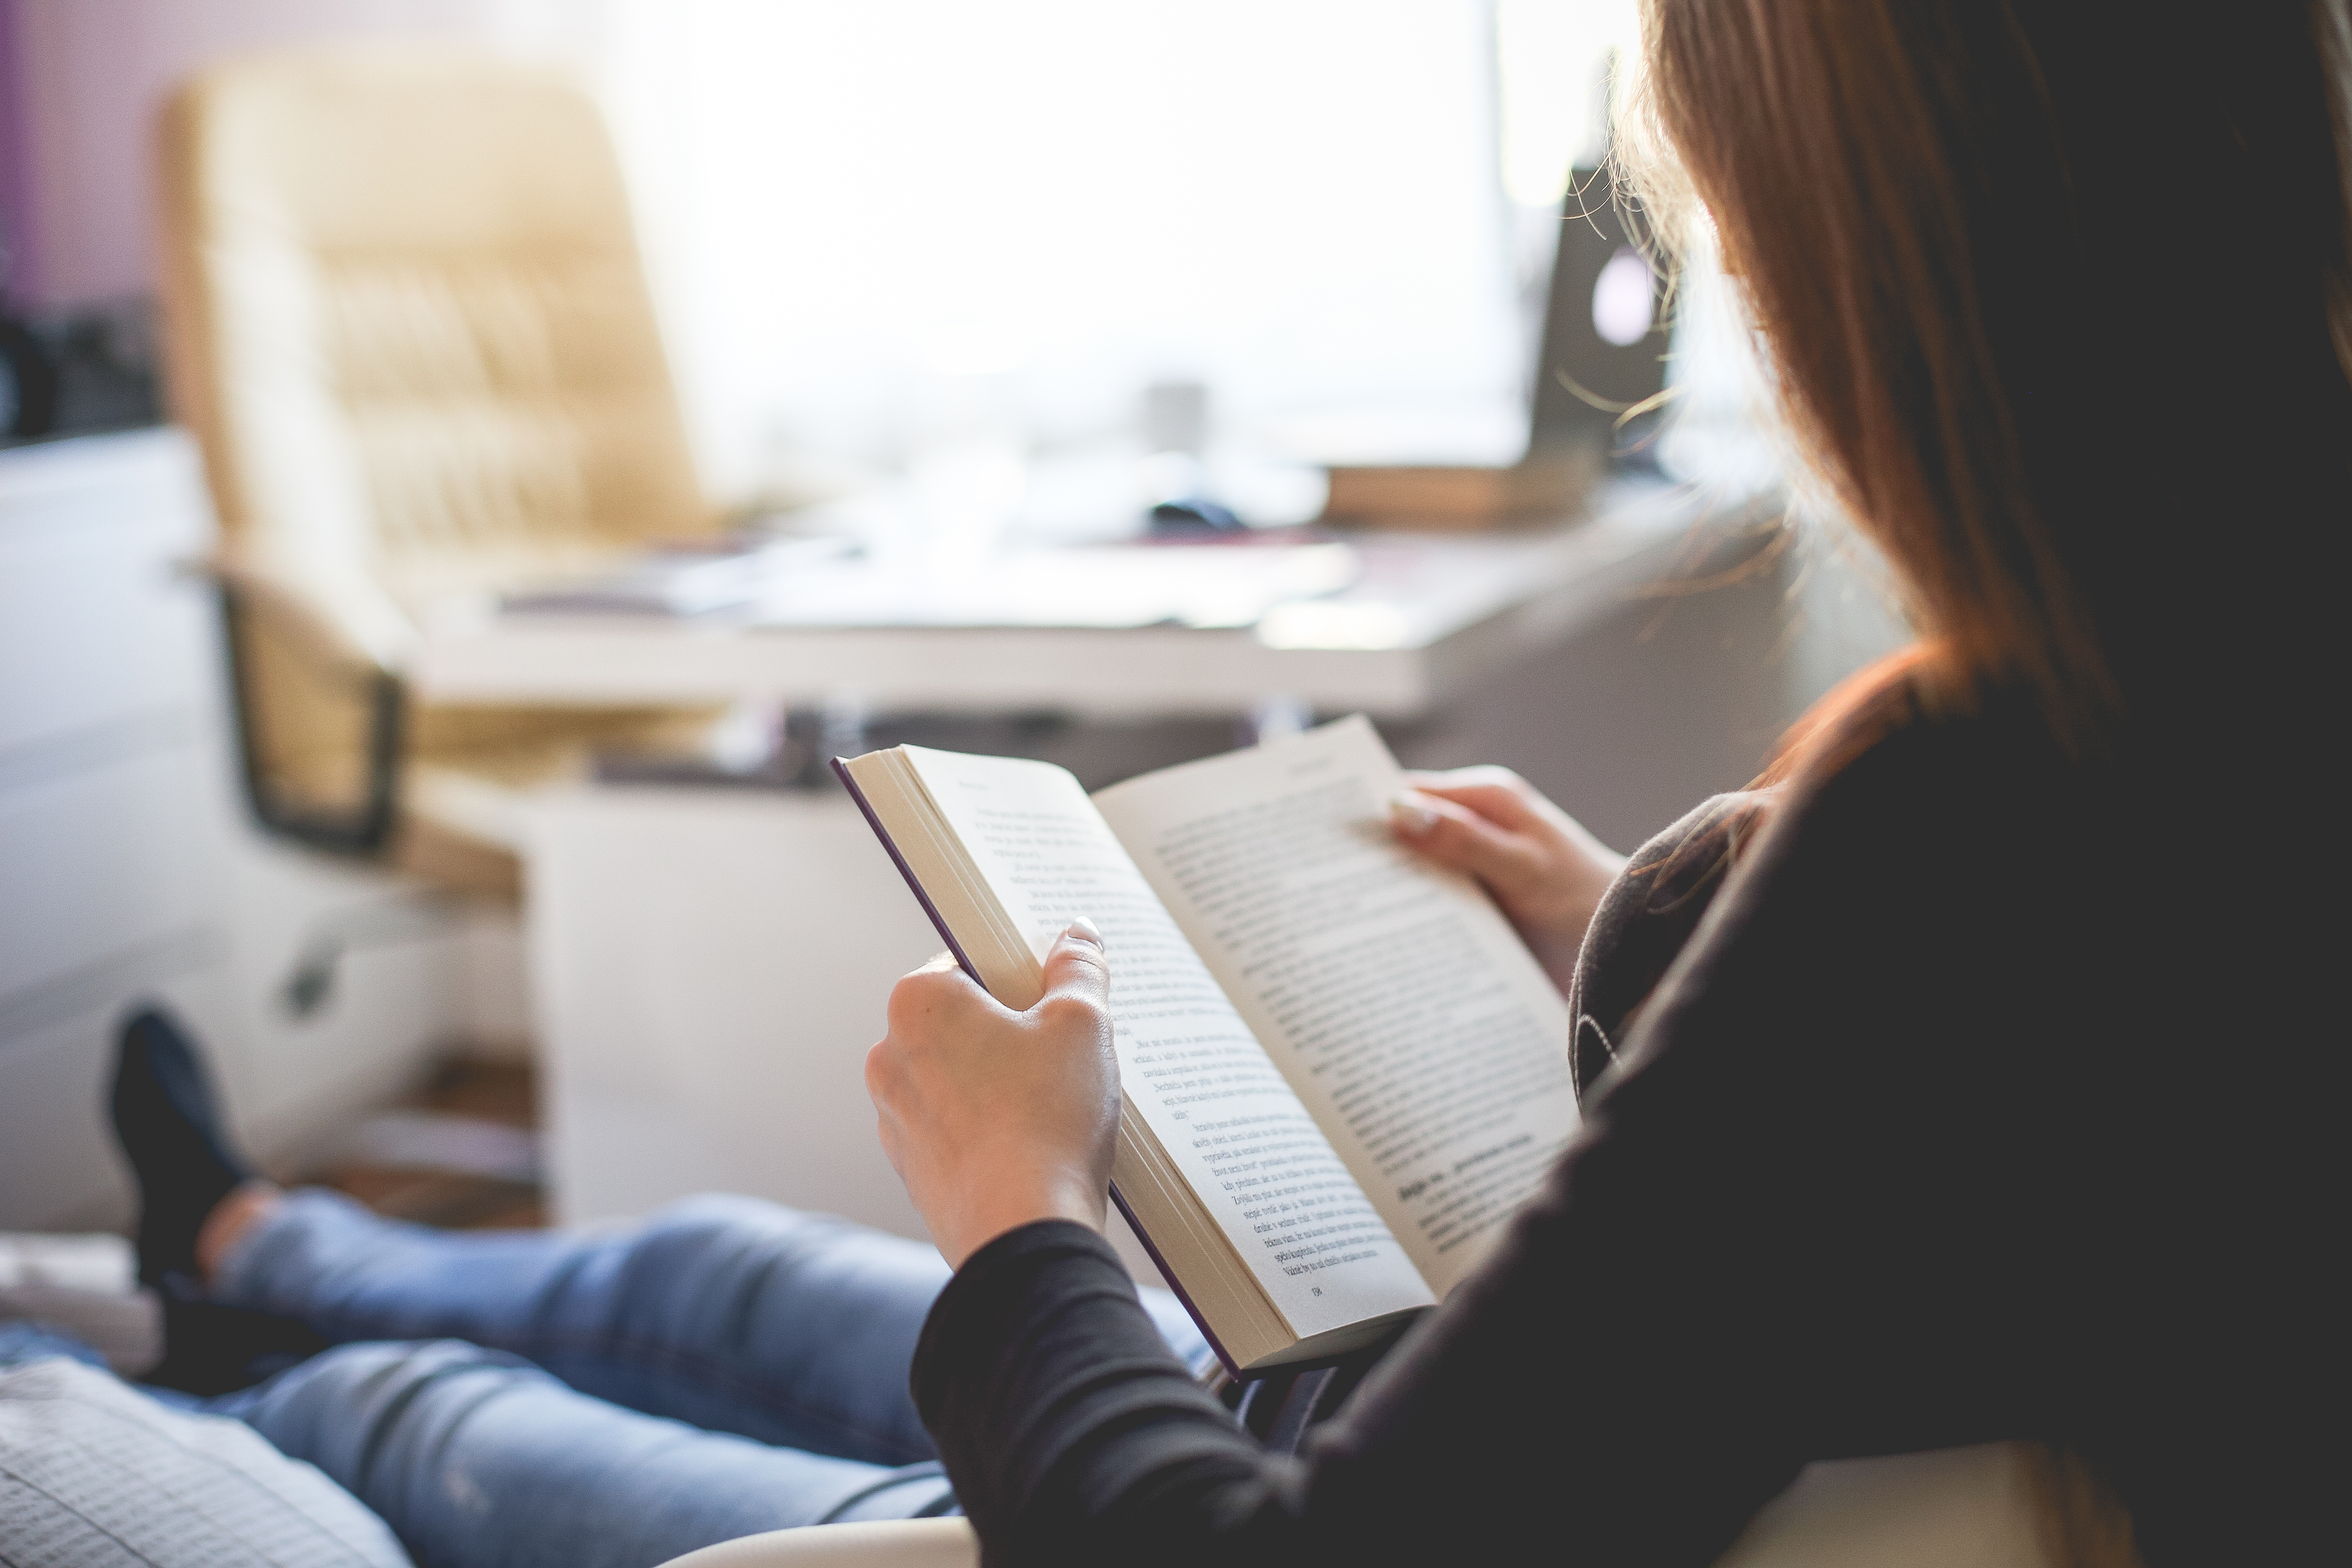 Girl Reading a Book at Home Free Stock Photo Download.